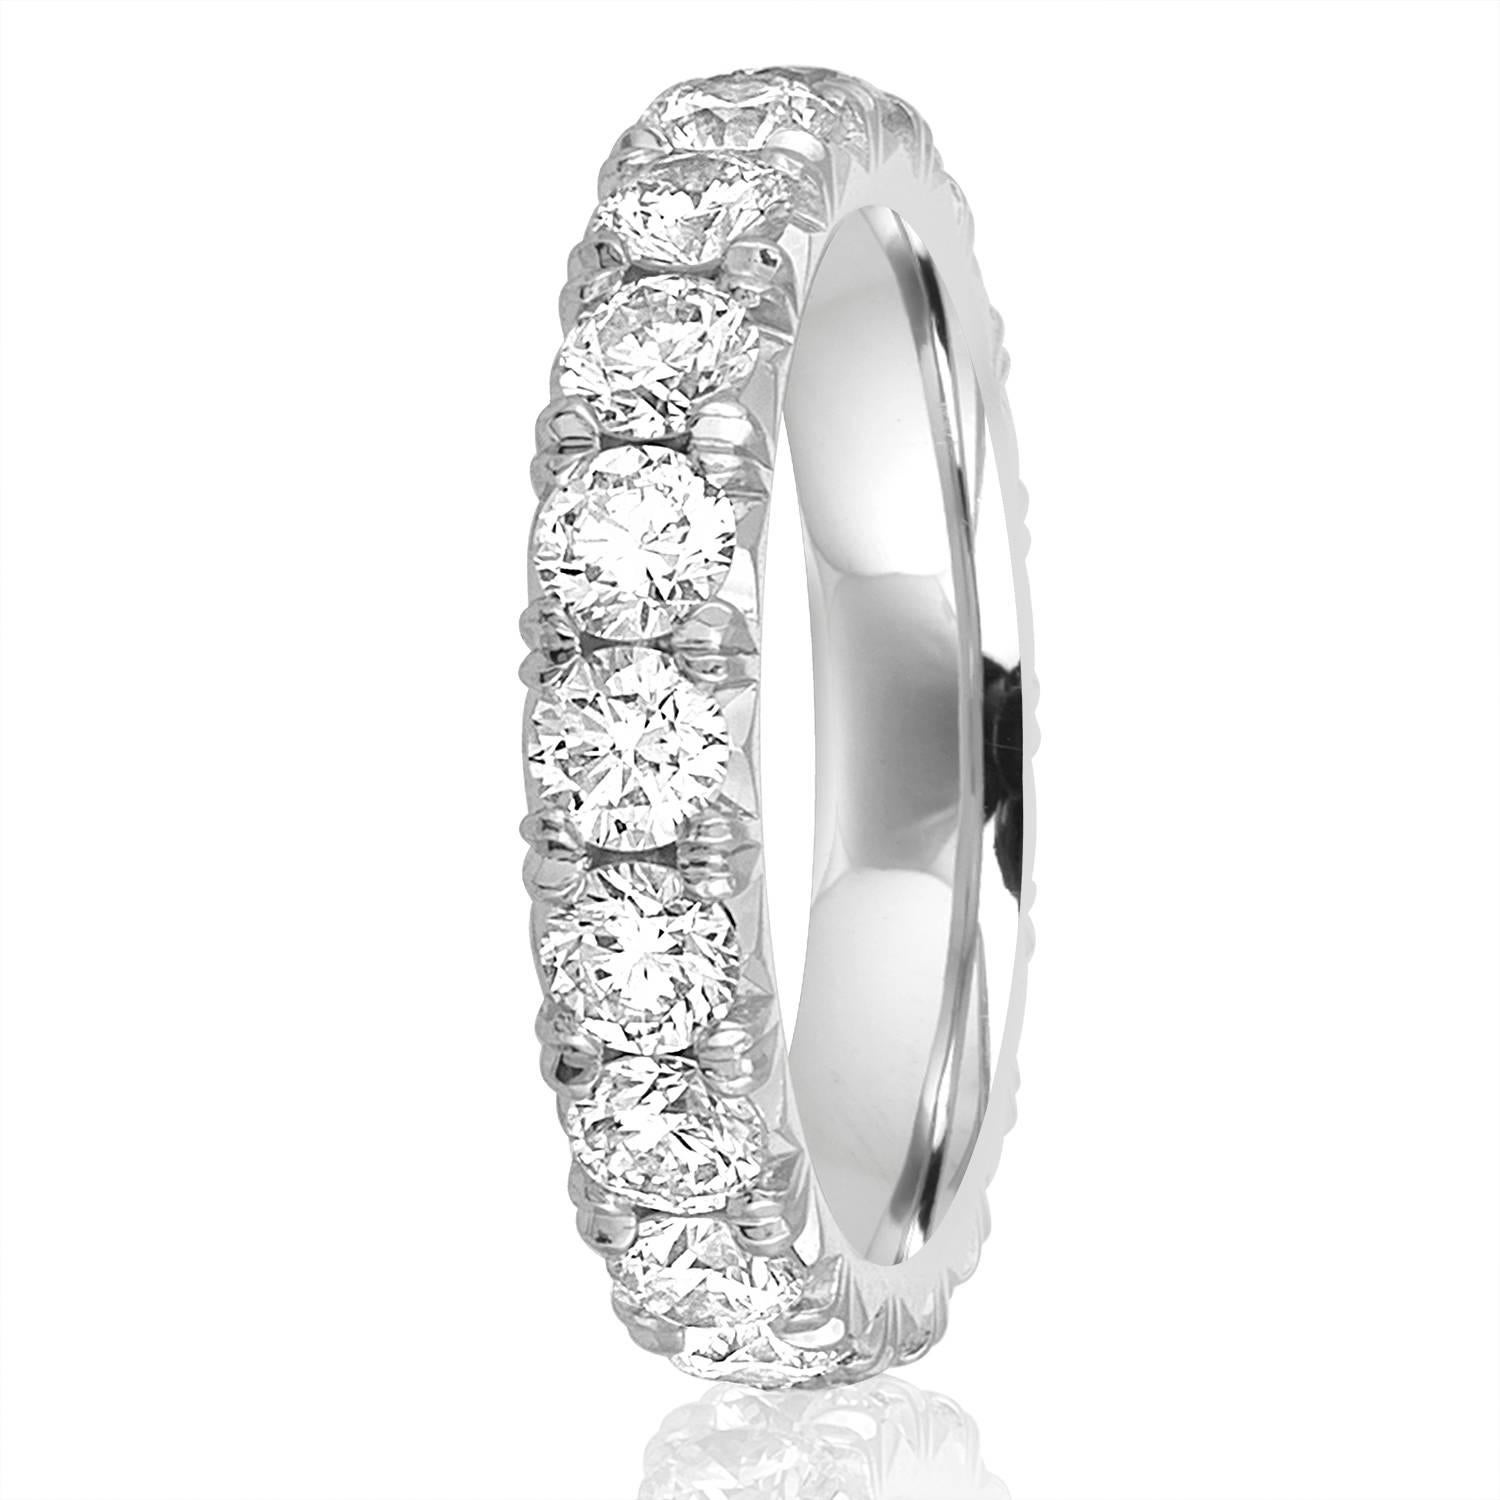 The ring is Platinum
There are 2.10 Carats In Diamonds F/G VS
The diamonds are round brilliant
The ring weighs 6.8 grams
The ring is a size 4.5, not sizable.